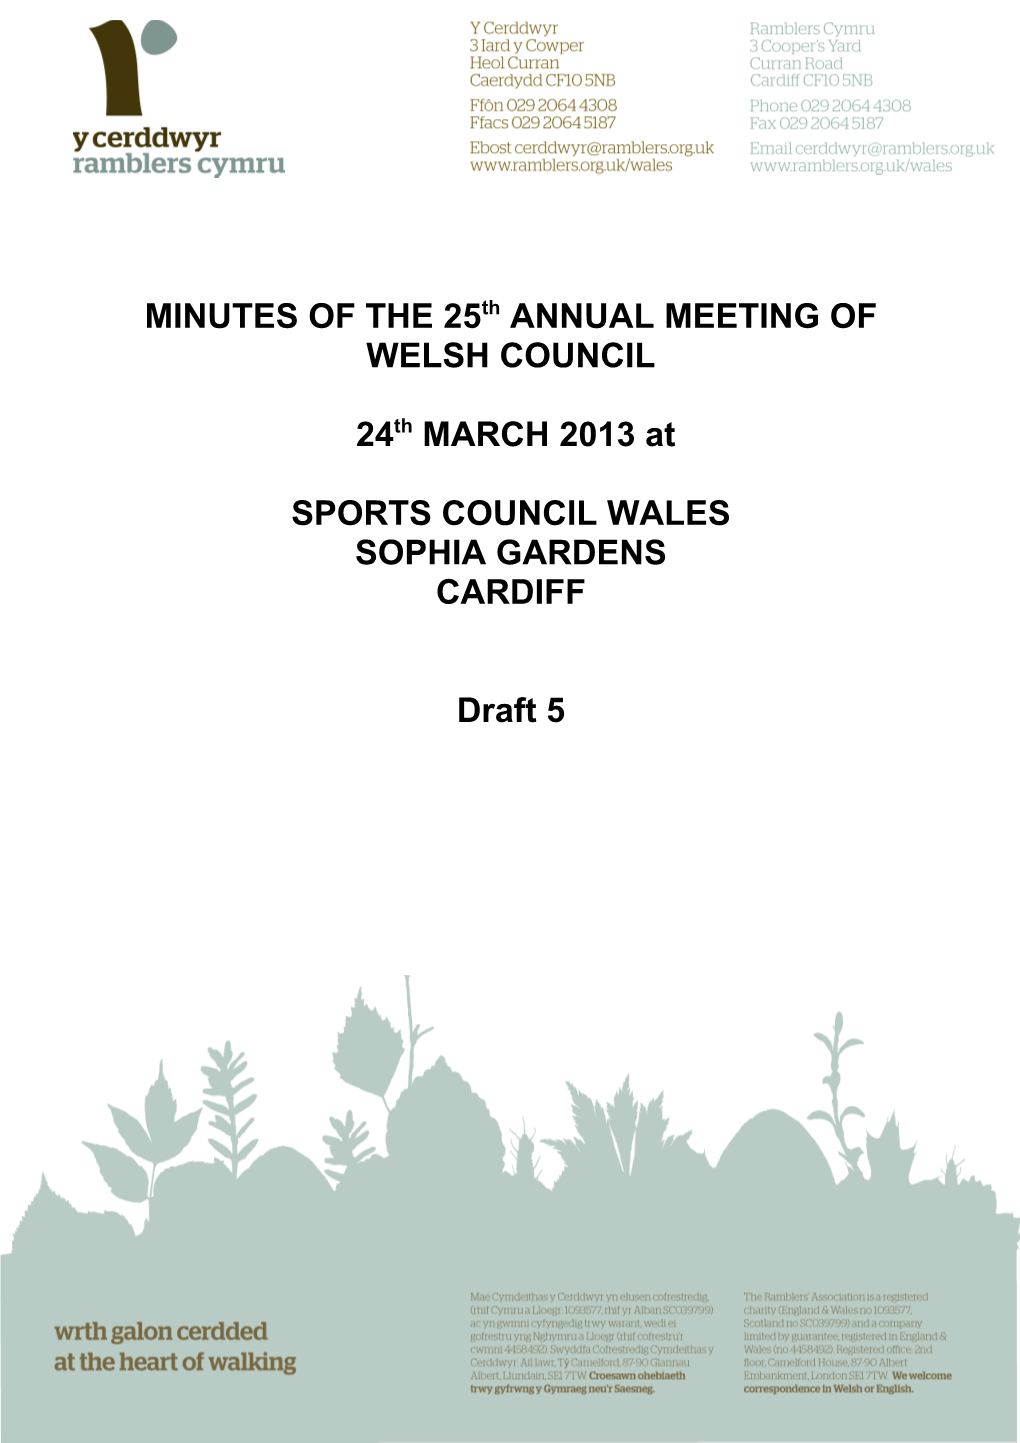 MINUTES of the 21St ANNUAL MEETING OF